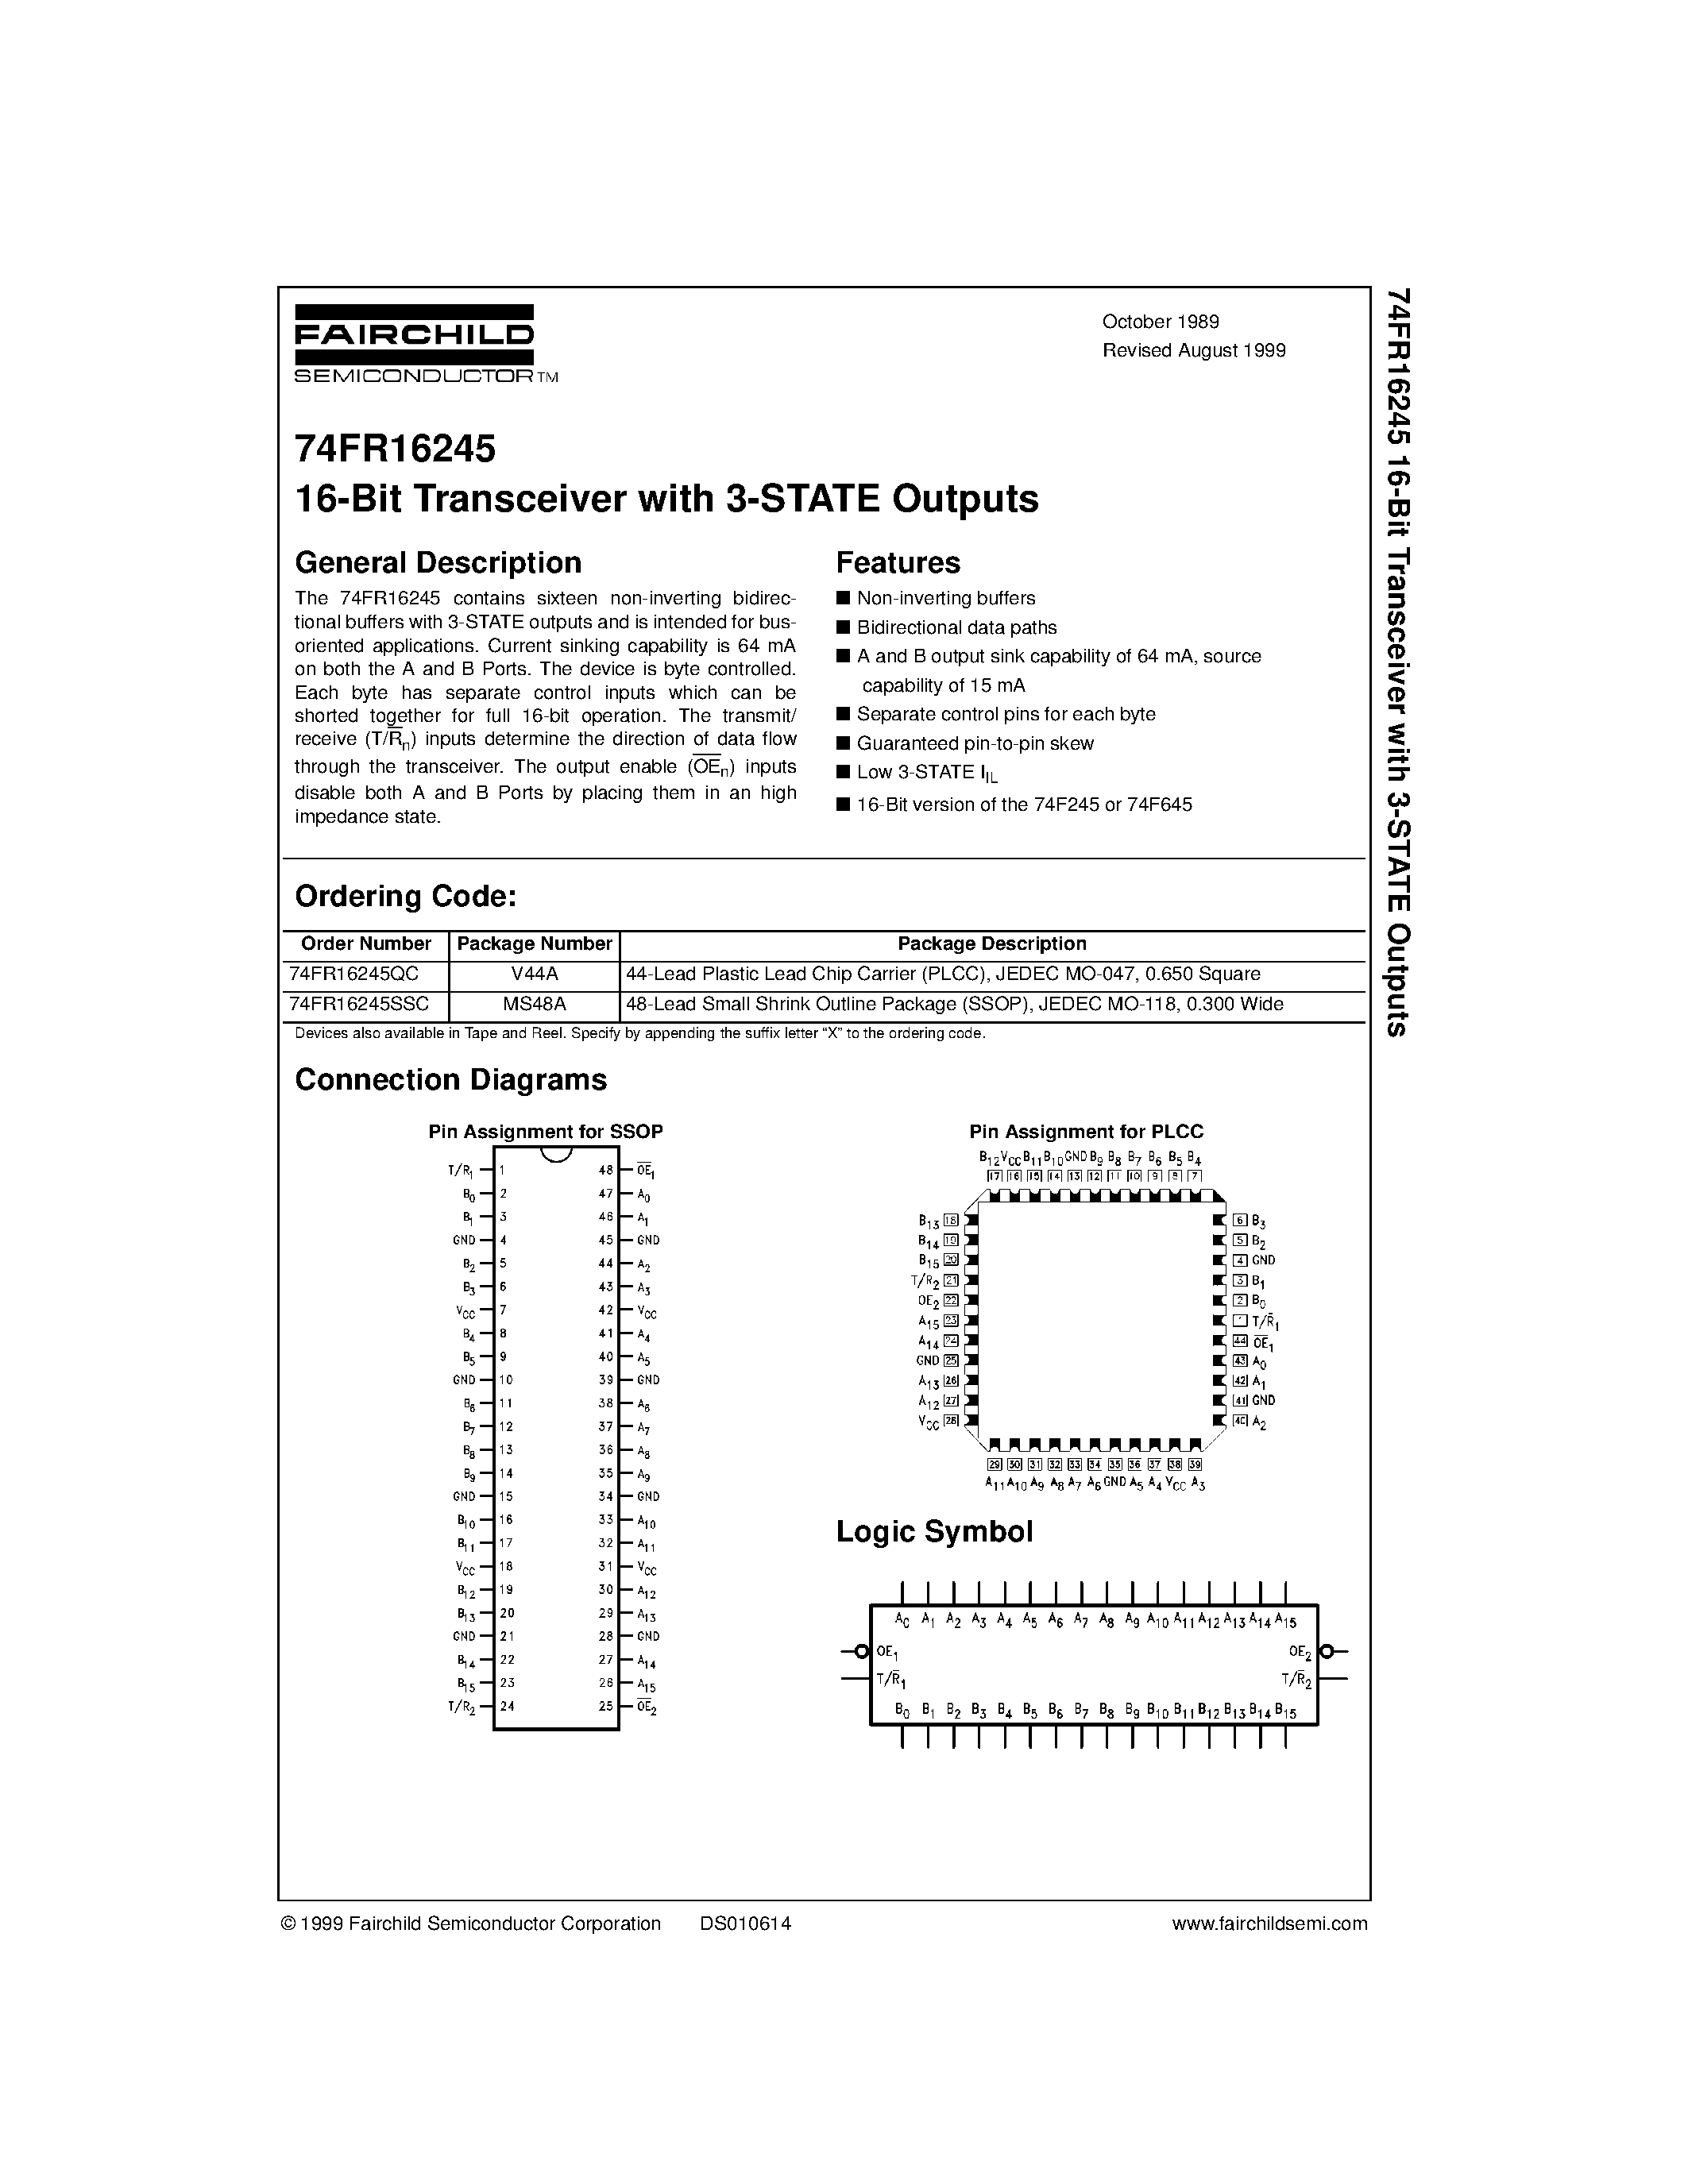 Datasheet 74FR16245SSC - 16-Bit Transceiver with 3-STATE Outputs page 1